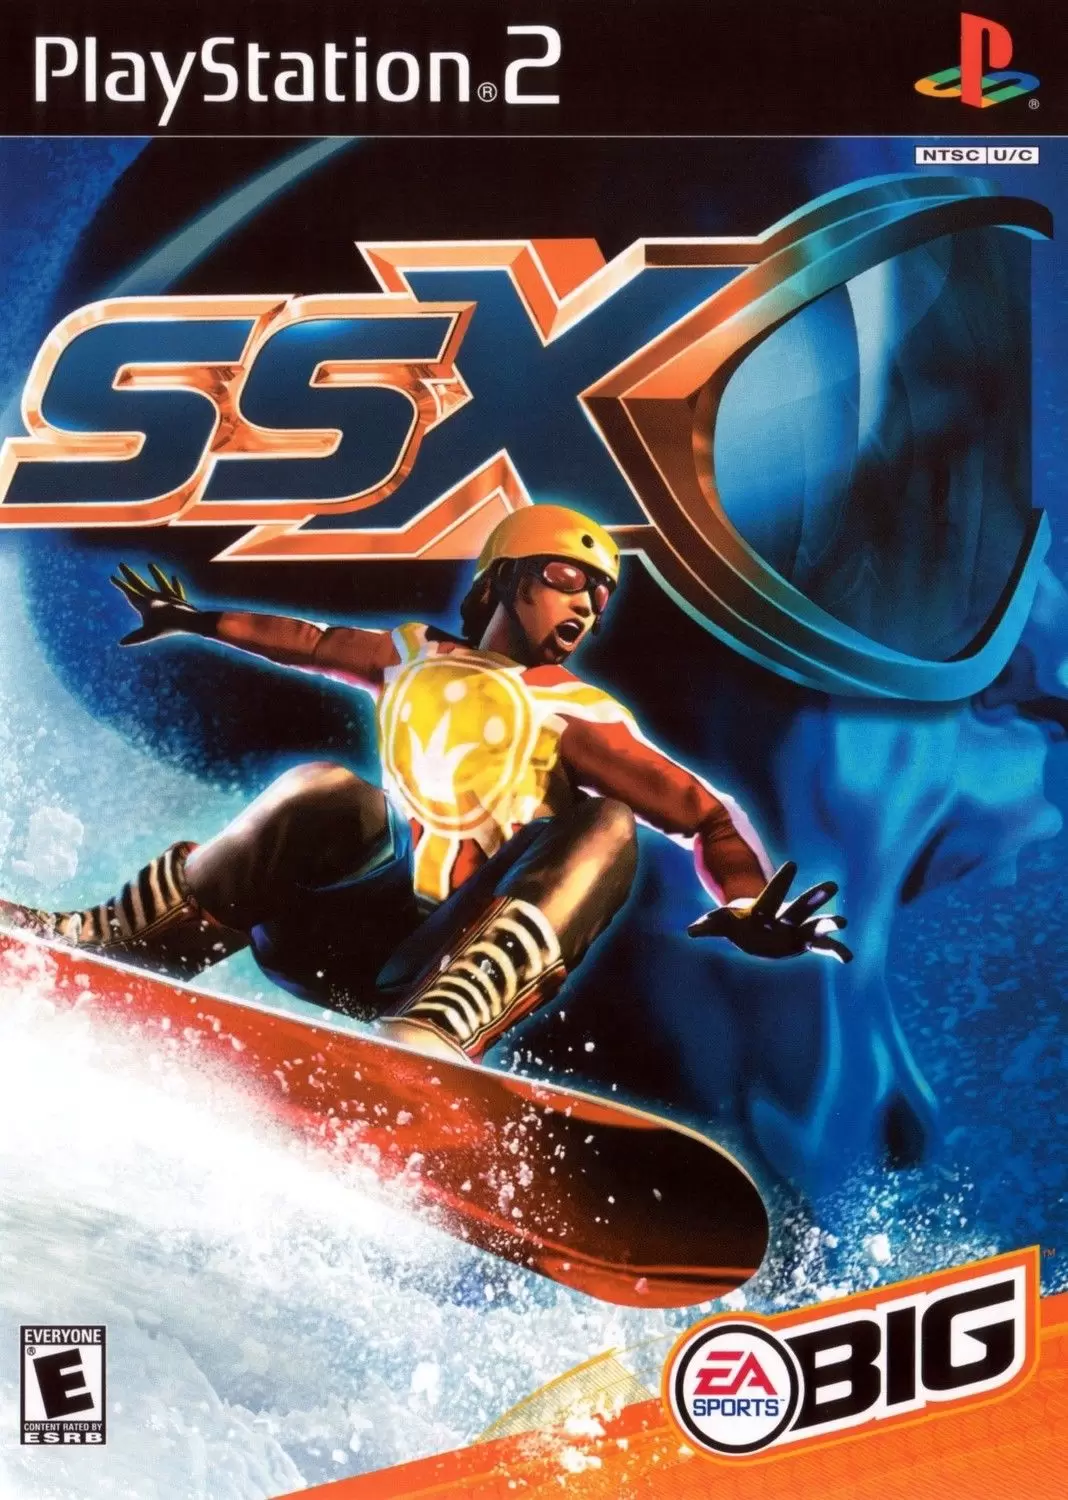 PS2 Games - SSX